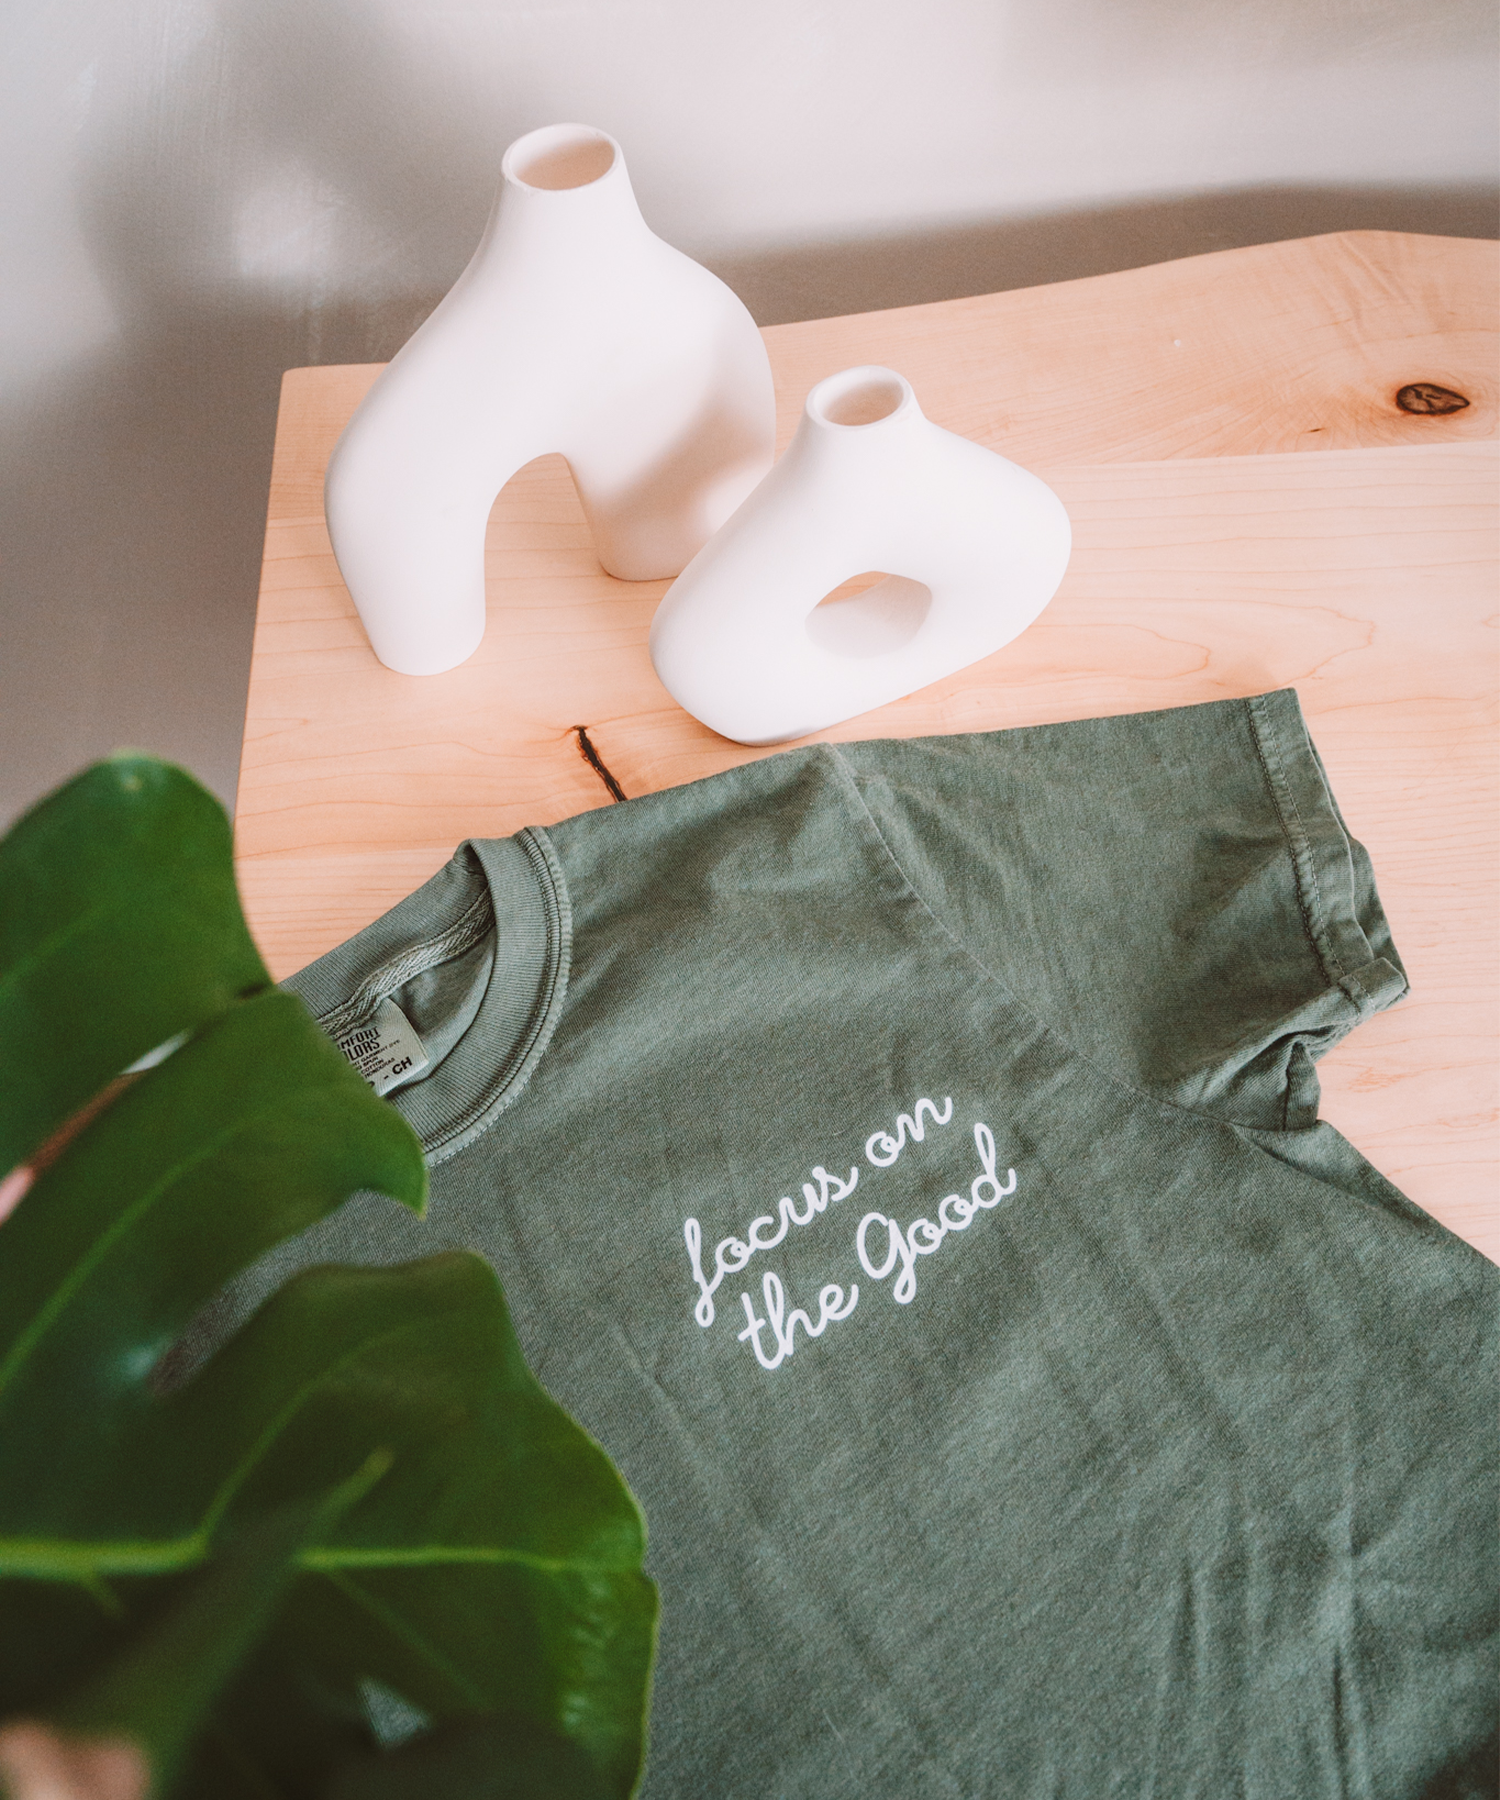 The "Focus on the Good" t-shirt in moss is laying on a desk with two asymmetrical vases in the front and a monstera leaf framing the front of the photo.